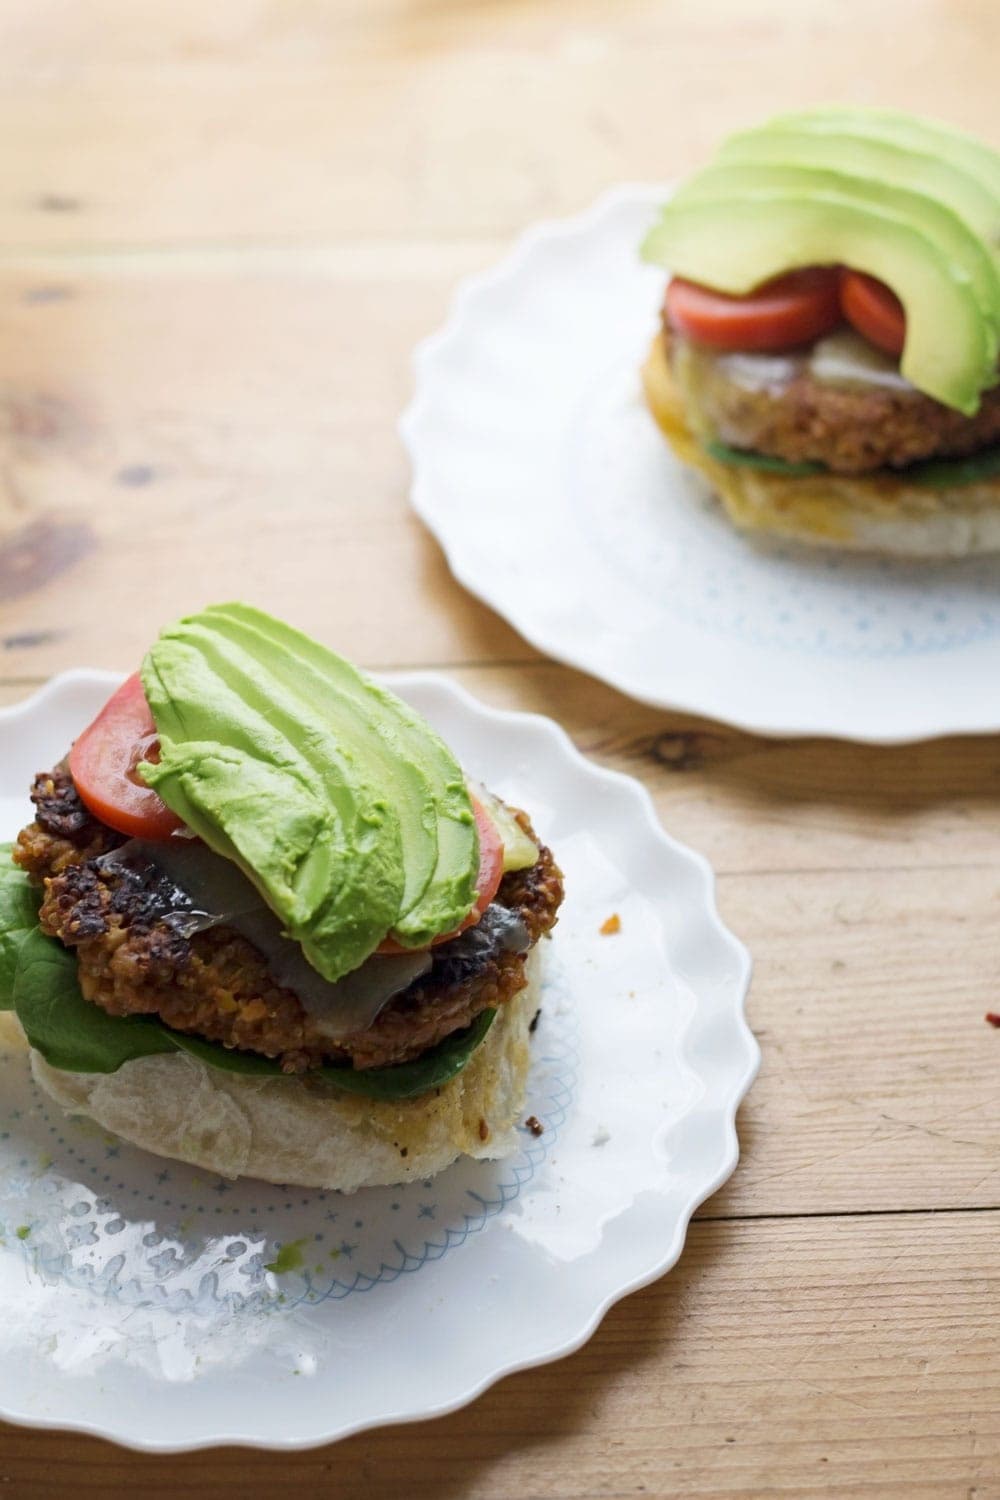 These chickpea quinoa veggie burgers are the perfect summer treat. Even meat lovers will adore these healthy, filling burgers.